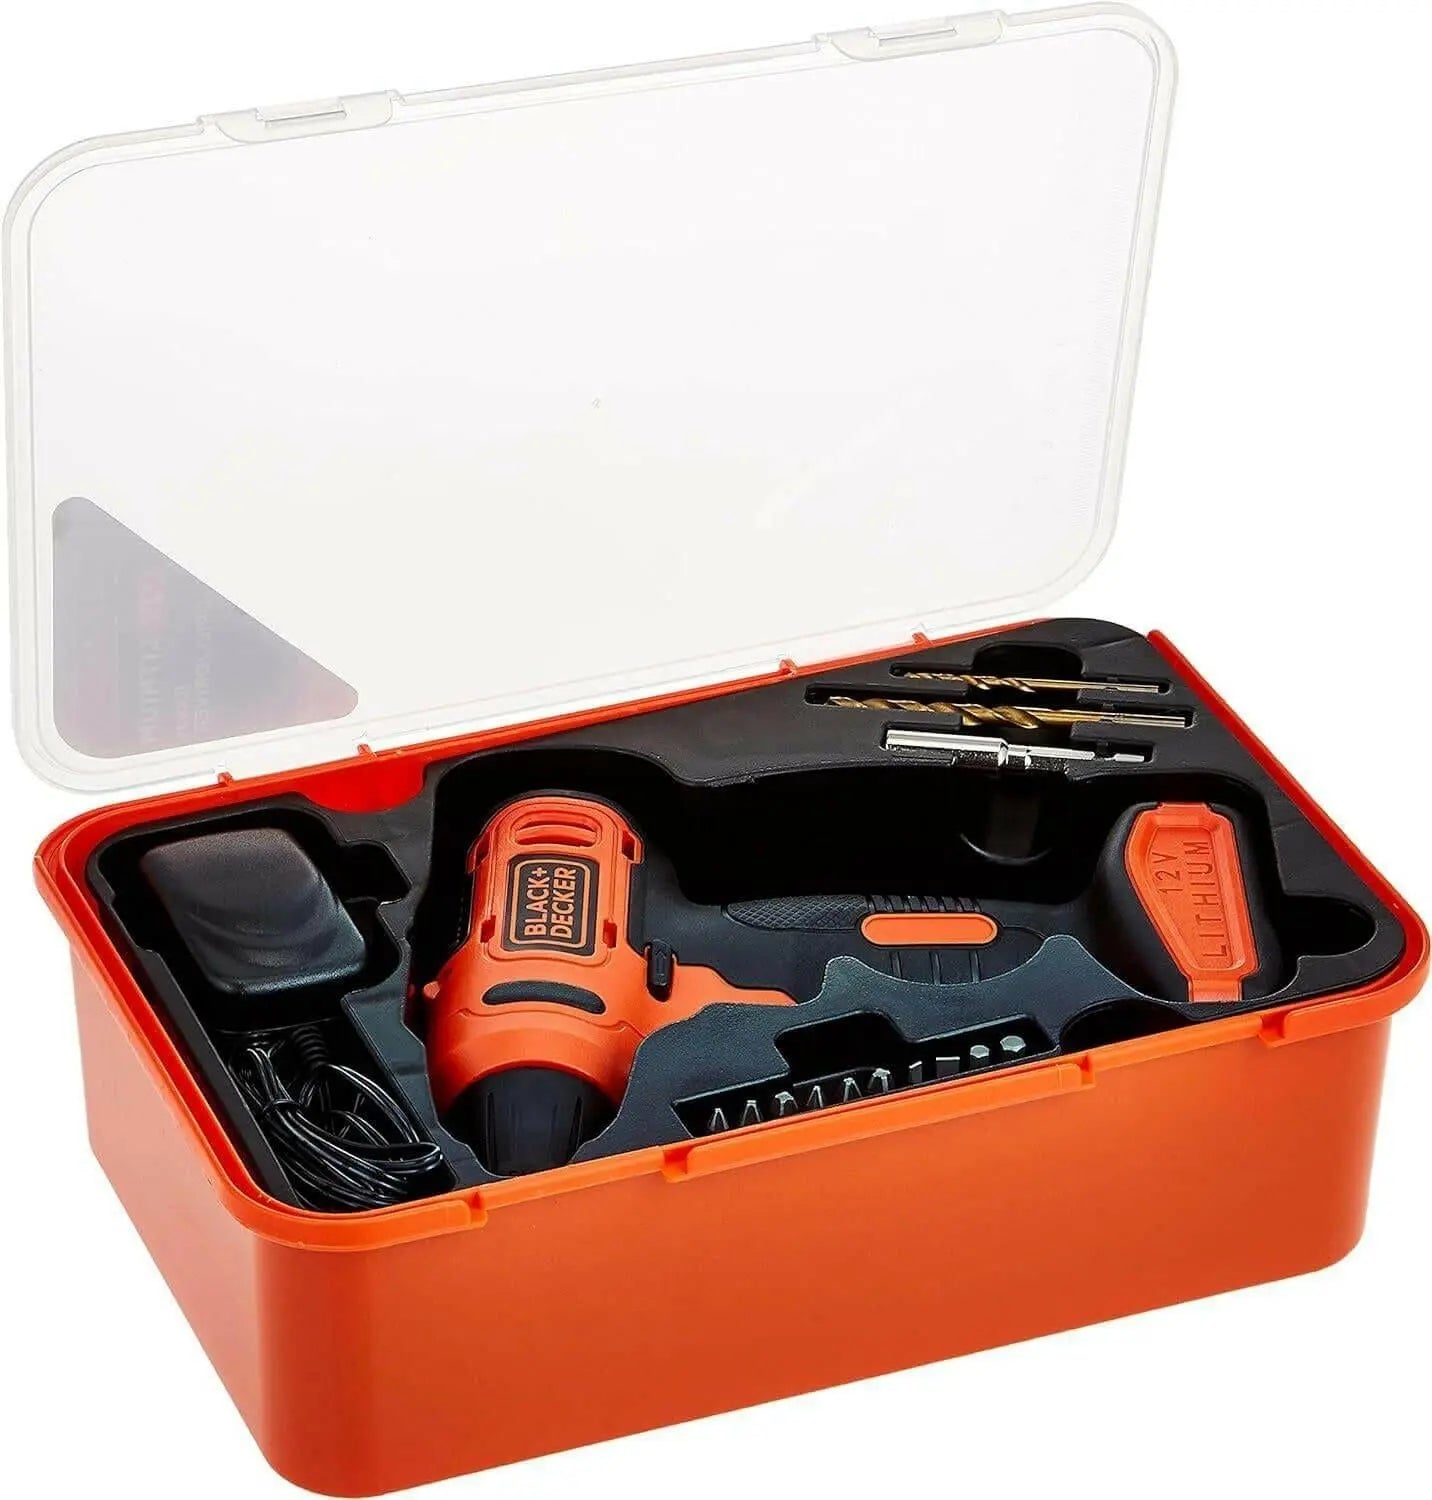 BLACK+DECKER 12V 1.5Ah 900 RPM Cordless Drill Driver with 13 Pieces Bits in Kitbox For Drilling and Fastening, Orange/Black, LD12SP-B5,